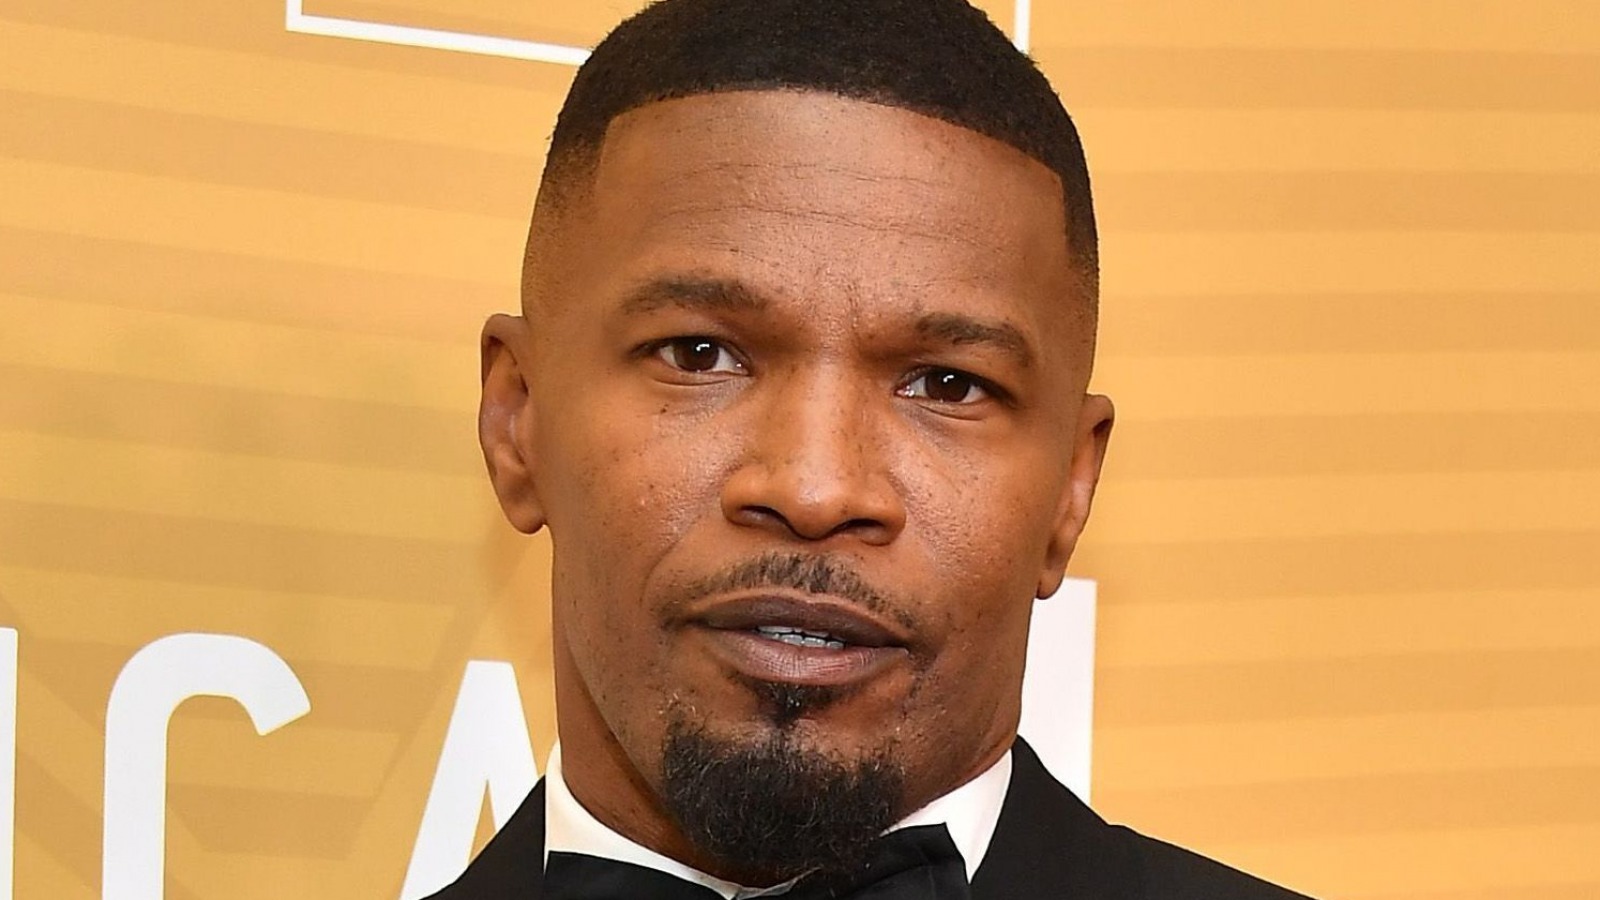 Jamie Foxx has had a blessed career, but his story has been anything but ea...